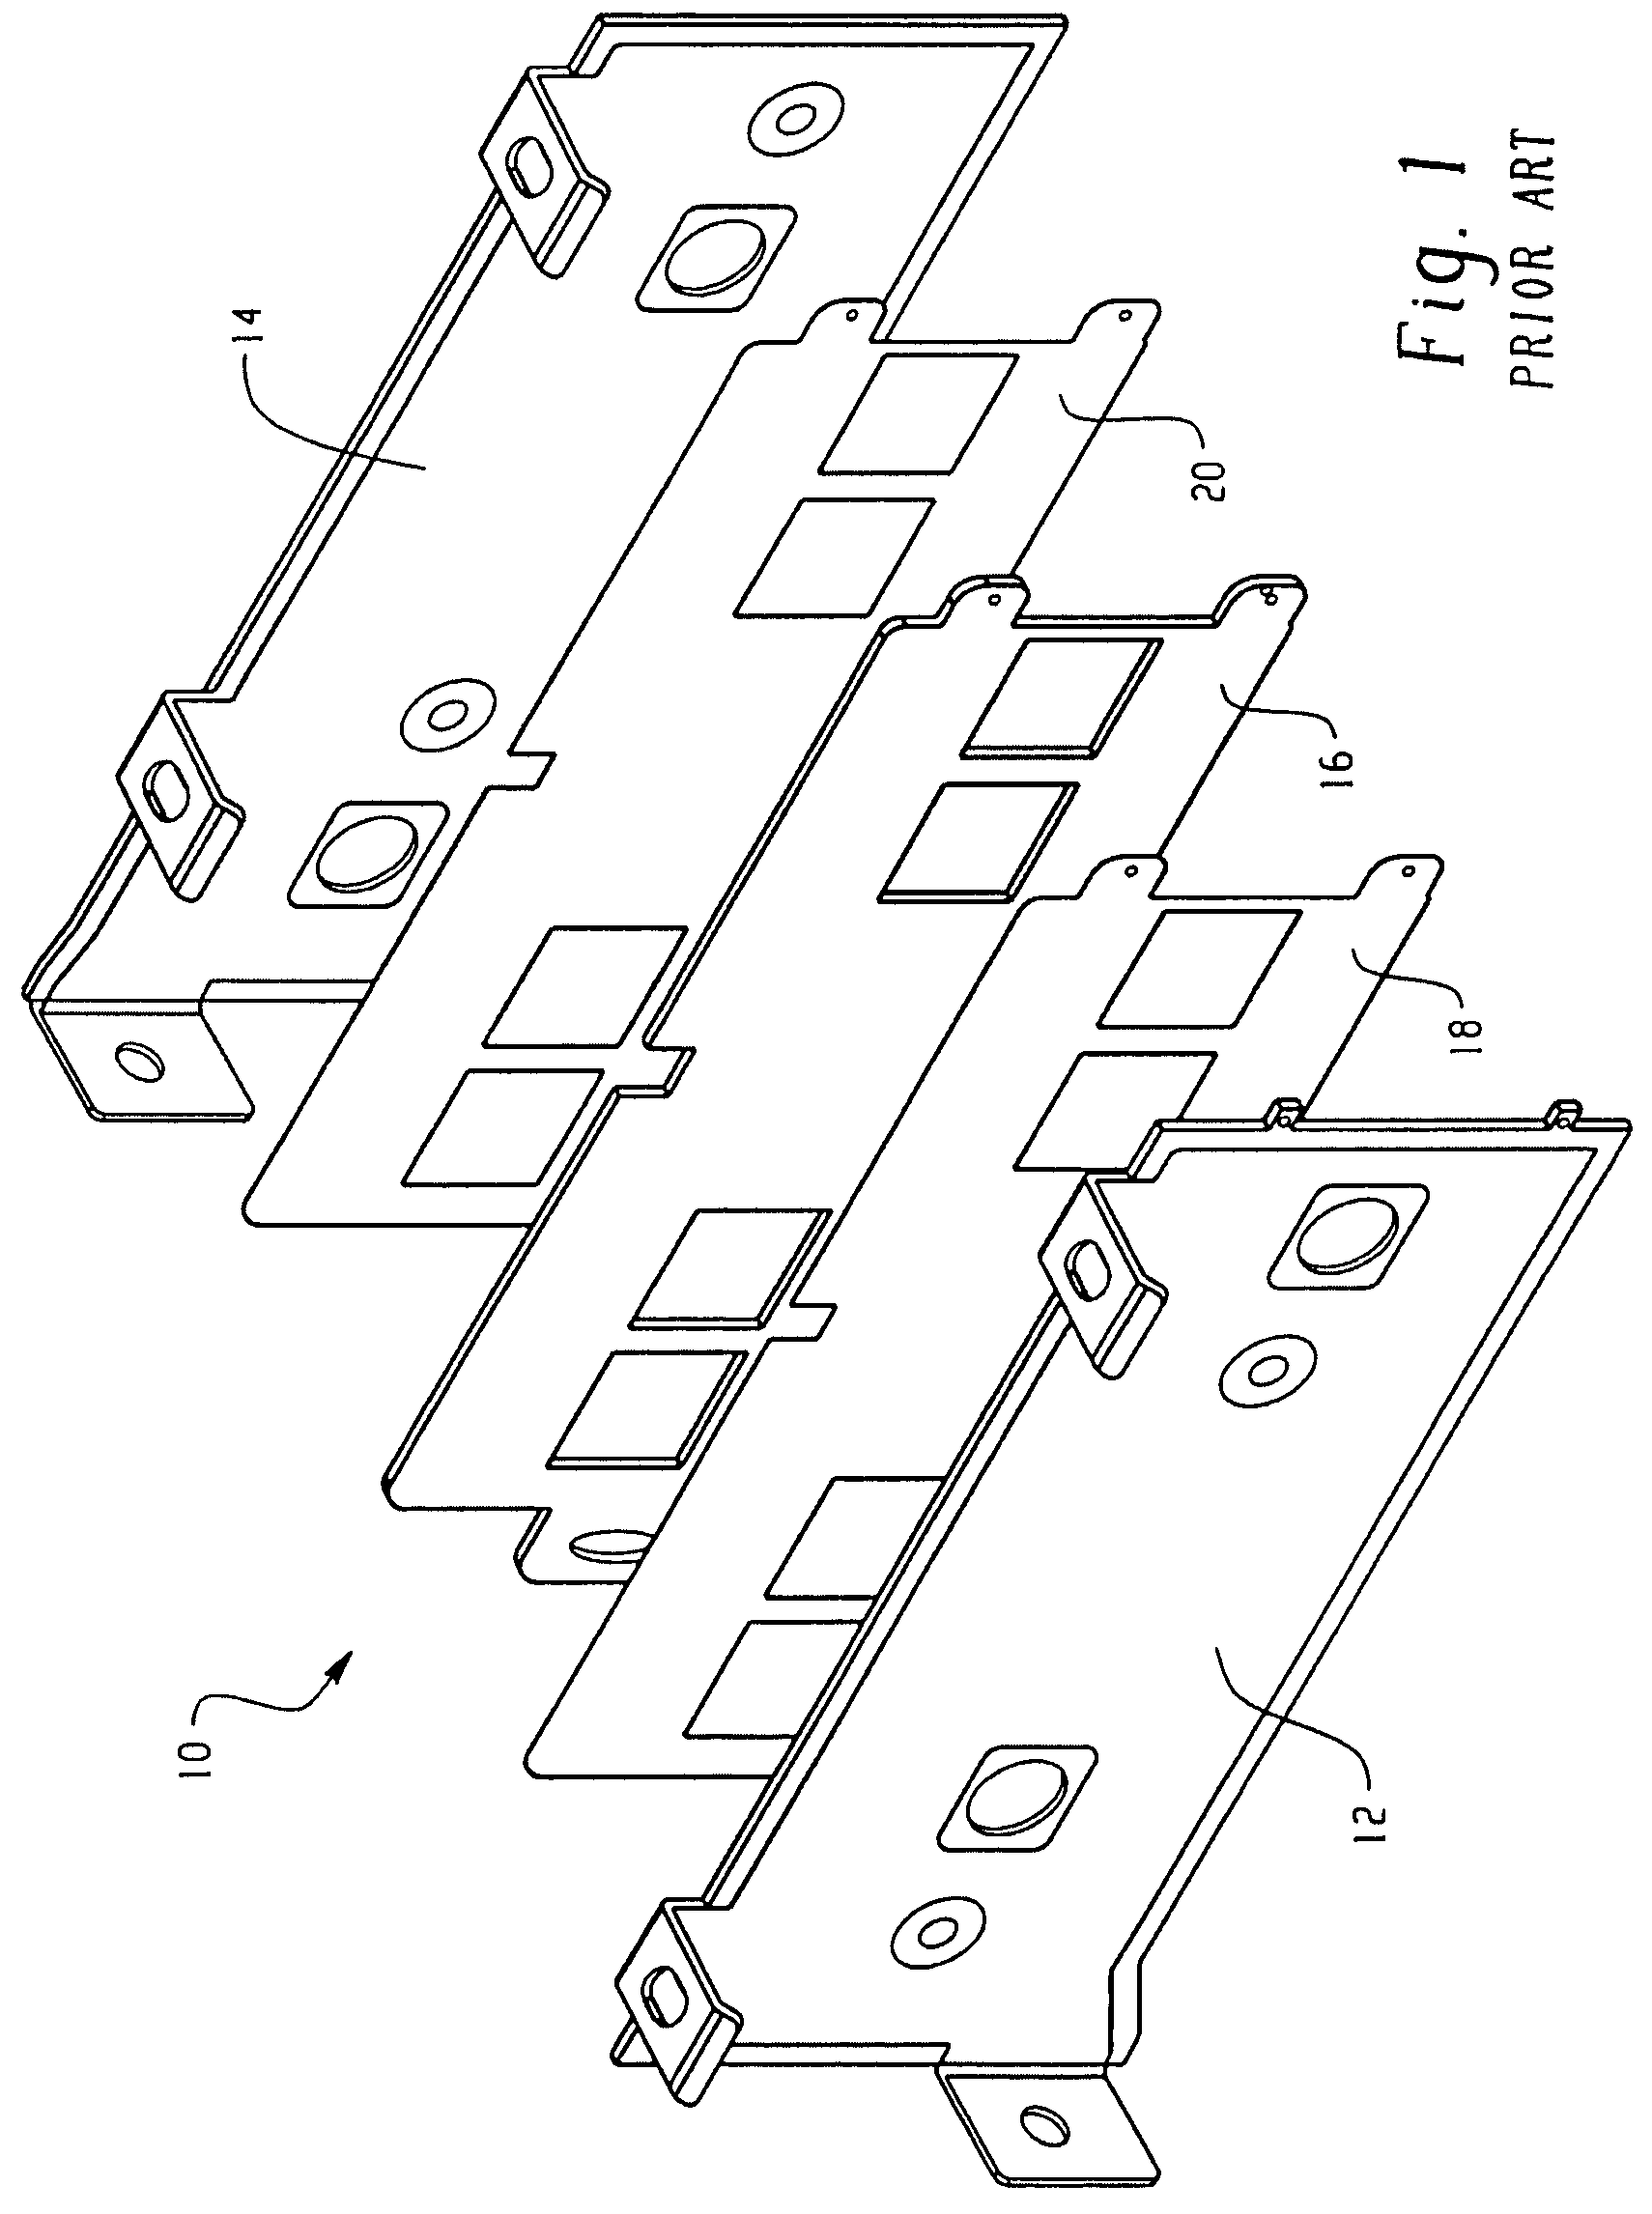 Laminated bus bars and methods of manufacture thereof